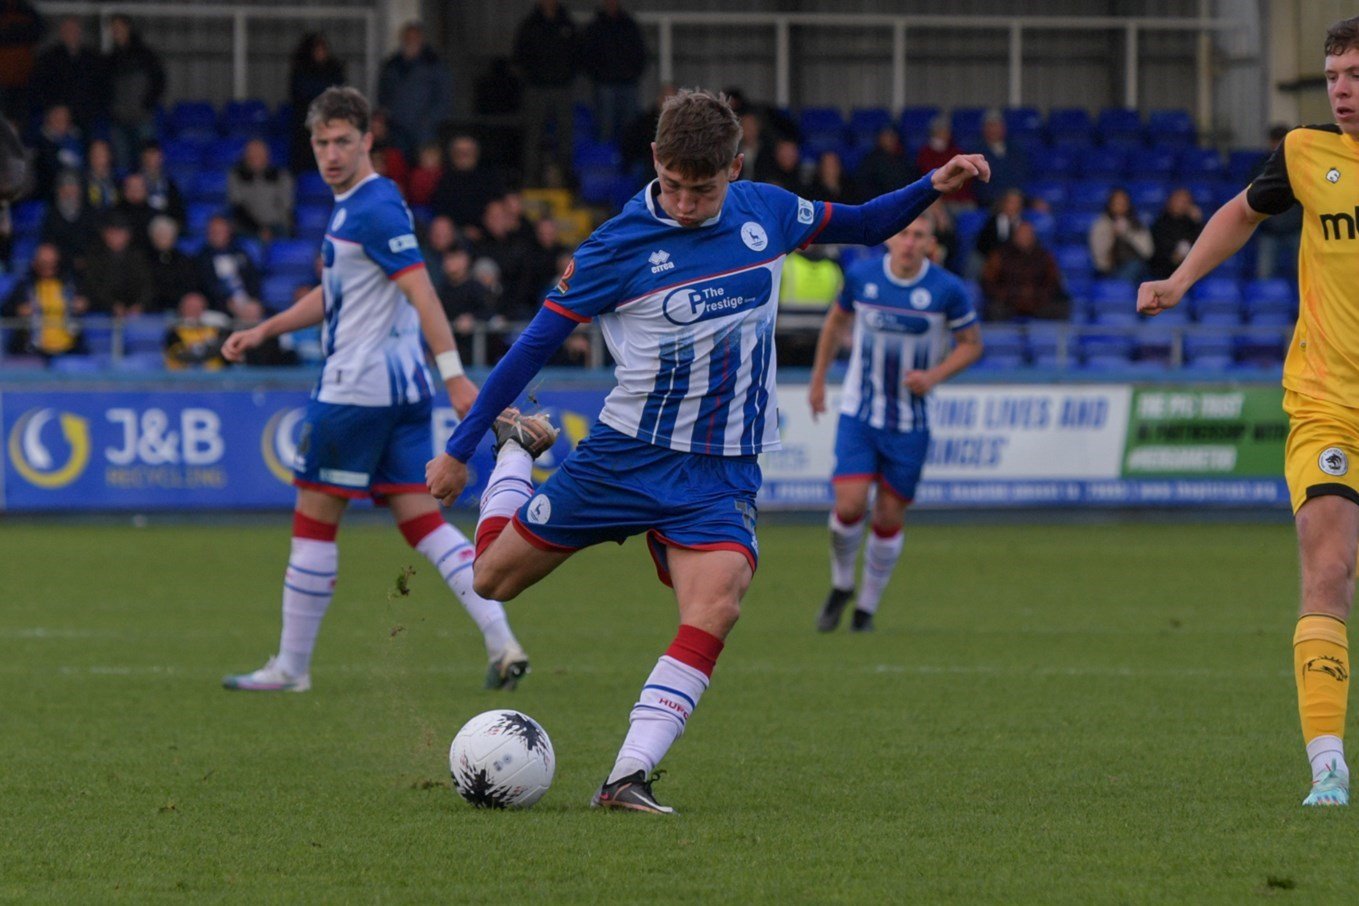 Preview  Hartlepool United (A) - News - Rochdale AFC